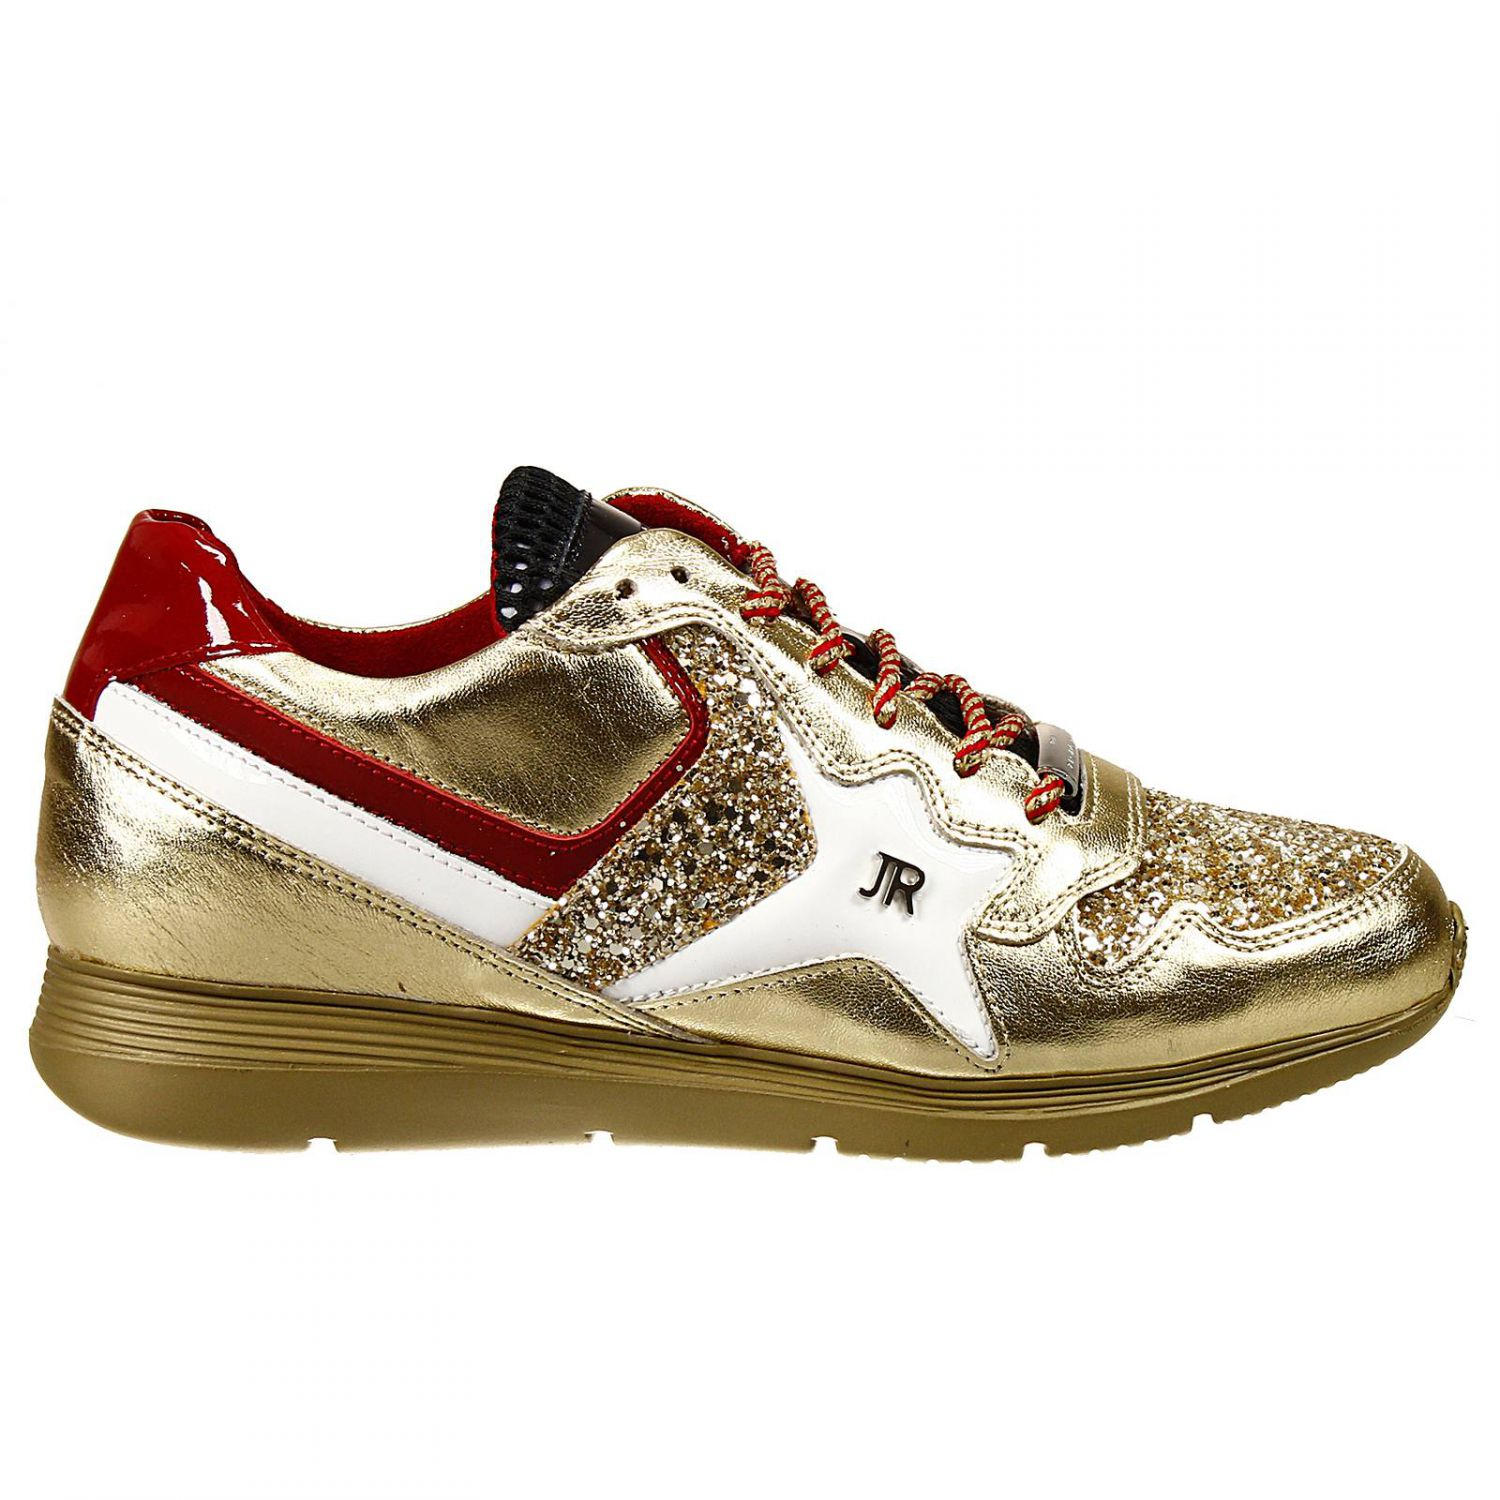 John richmond Shoes Esther Sneakers Leather Laminated E ...